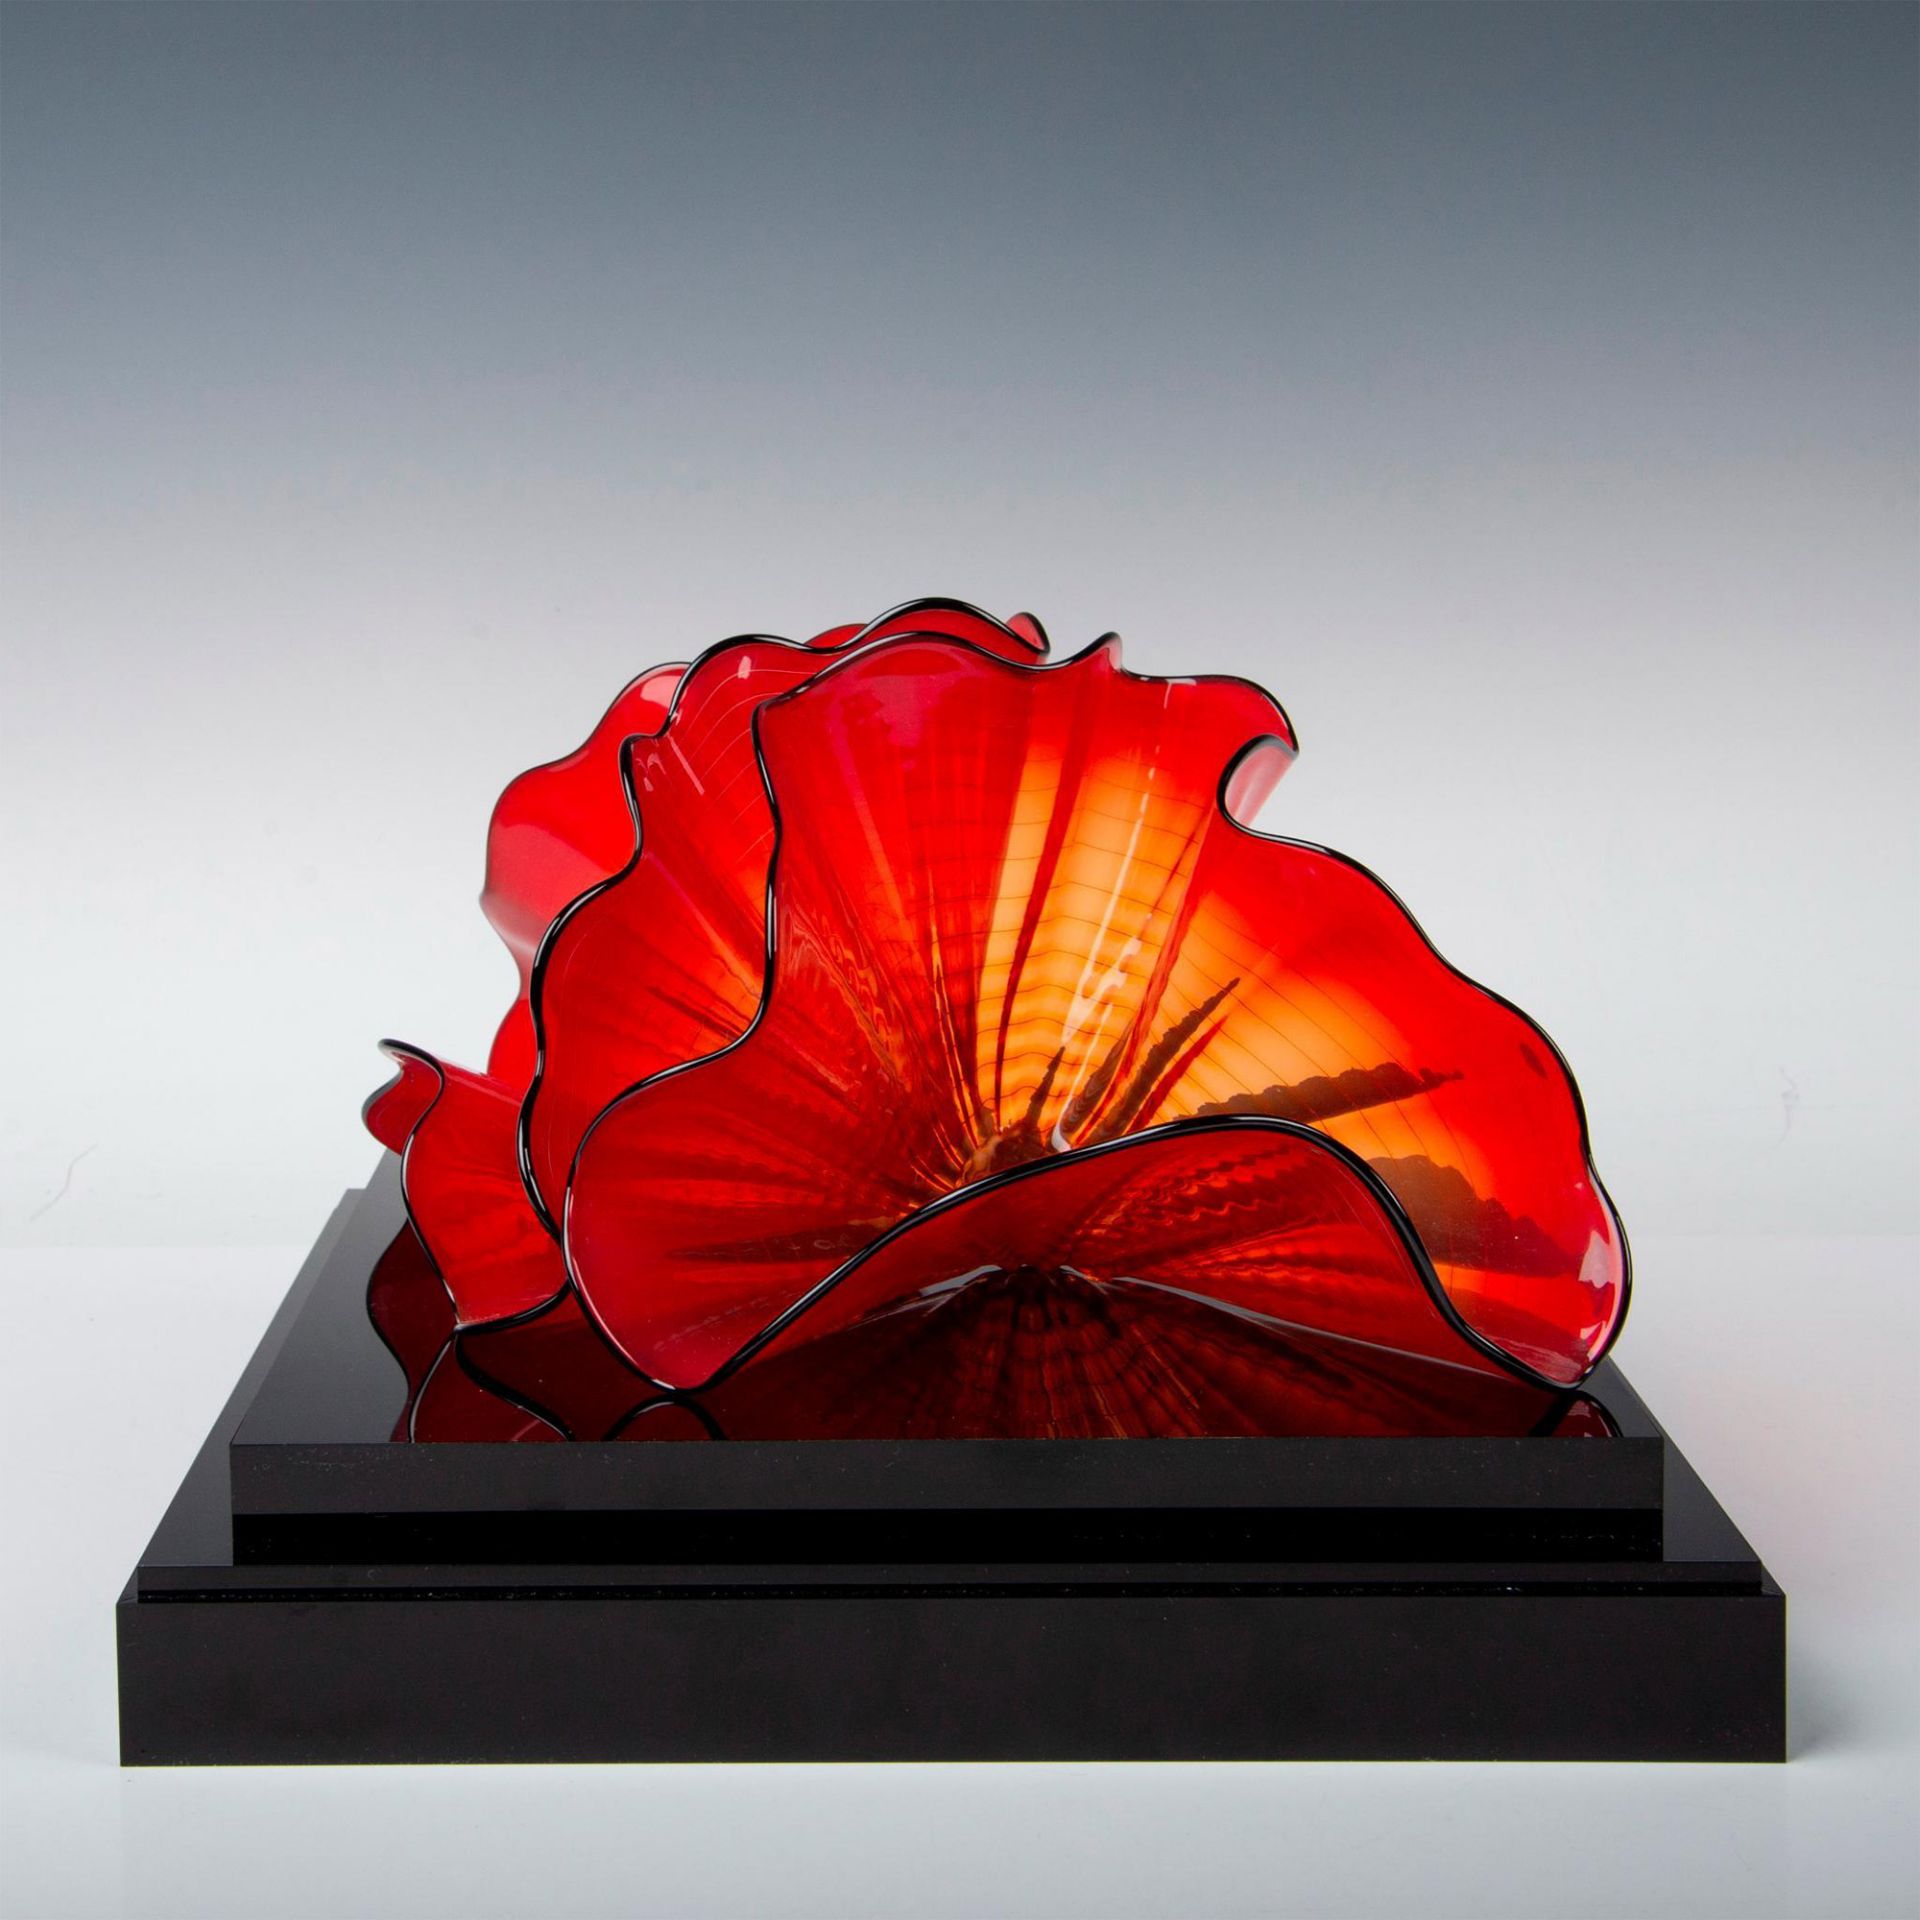 Dale Chihuly Portland Press Art Glass, Red Amber Persian Pair - Image 5 of 20